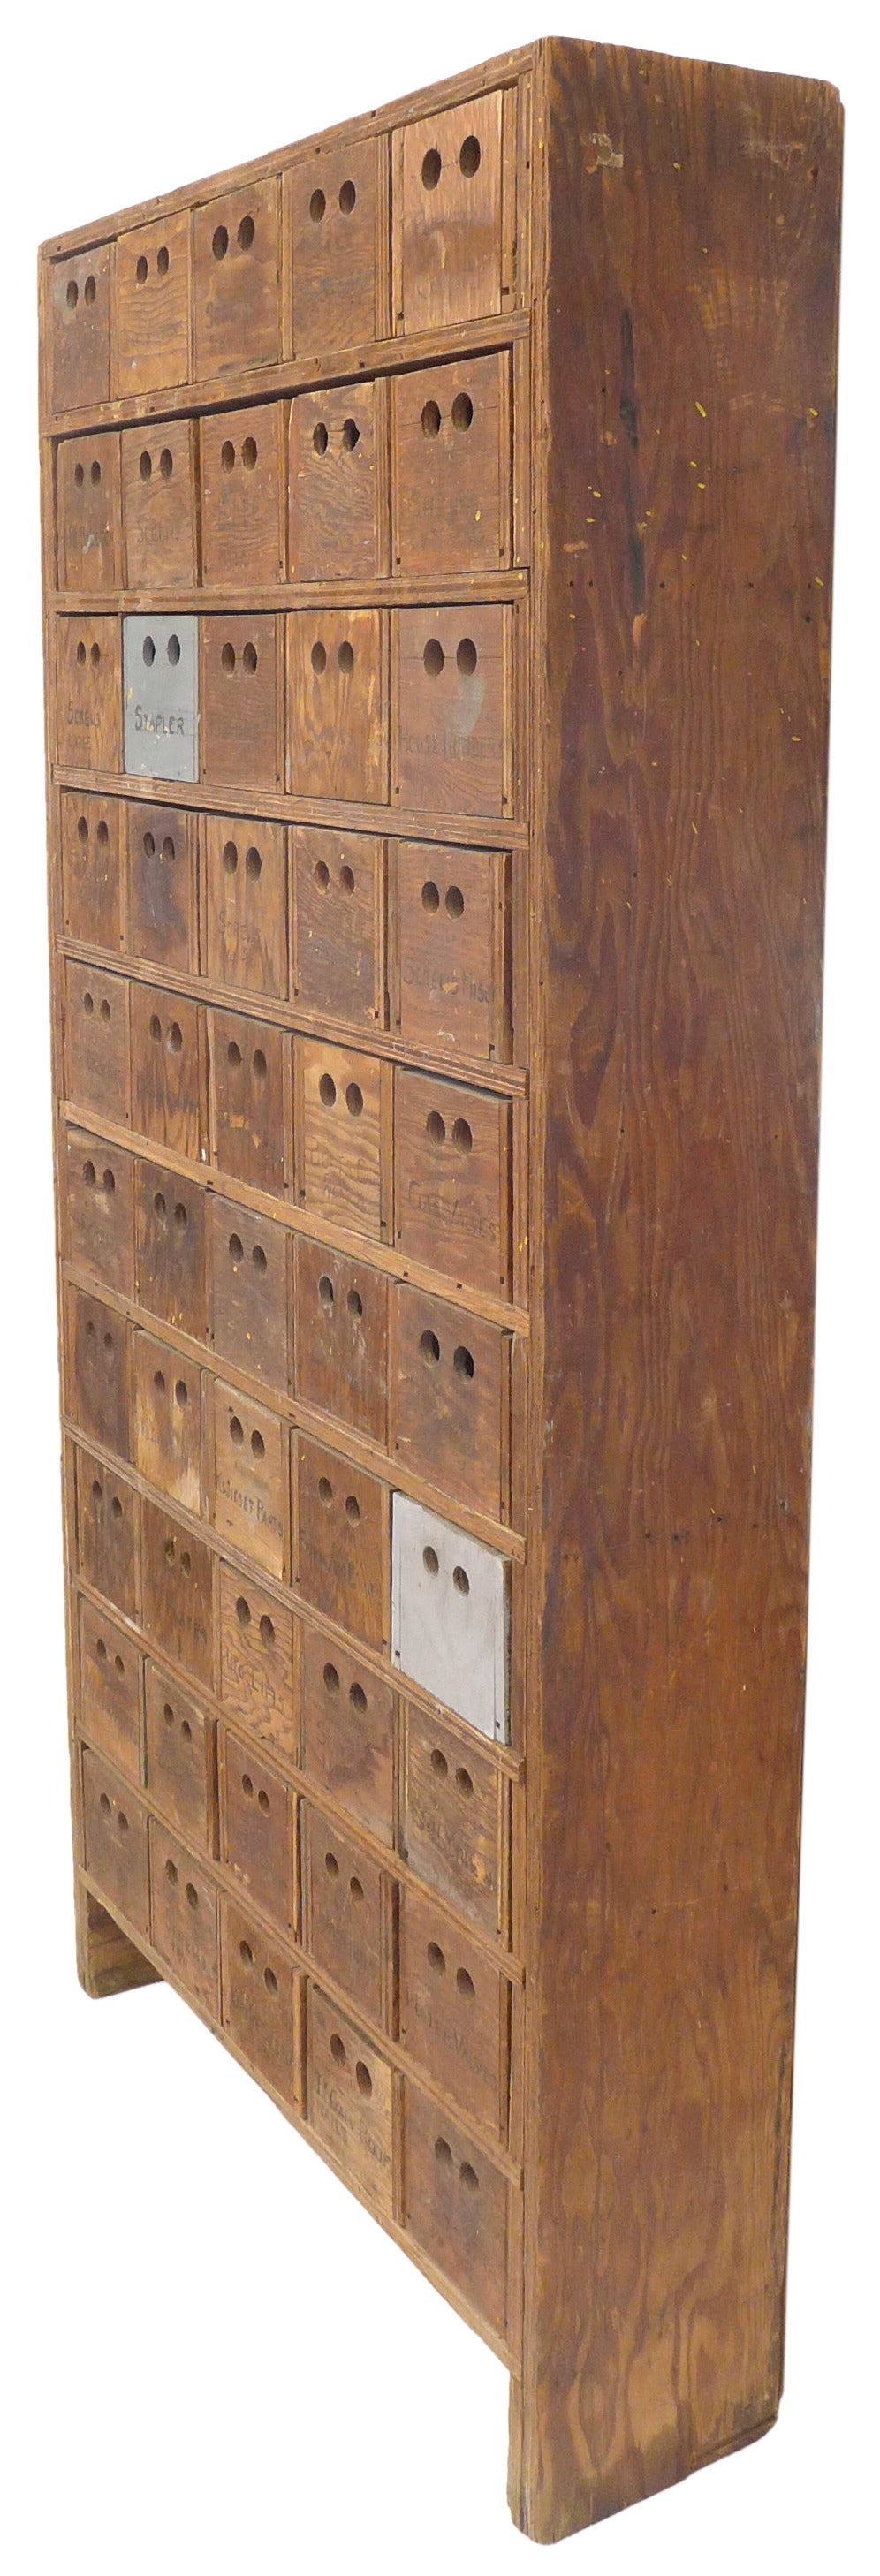 An incredible 50-drawer primitive cabinet in plywood.  A much desired, even patina from years of use with subtle remnants of paint throughout.  Drawer-fronts featuring handwritten labeling and double perforations for pulls.  An unintentionally but